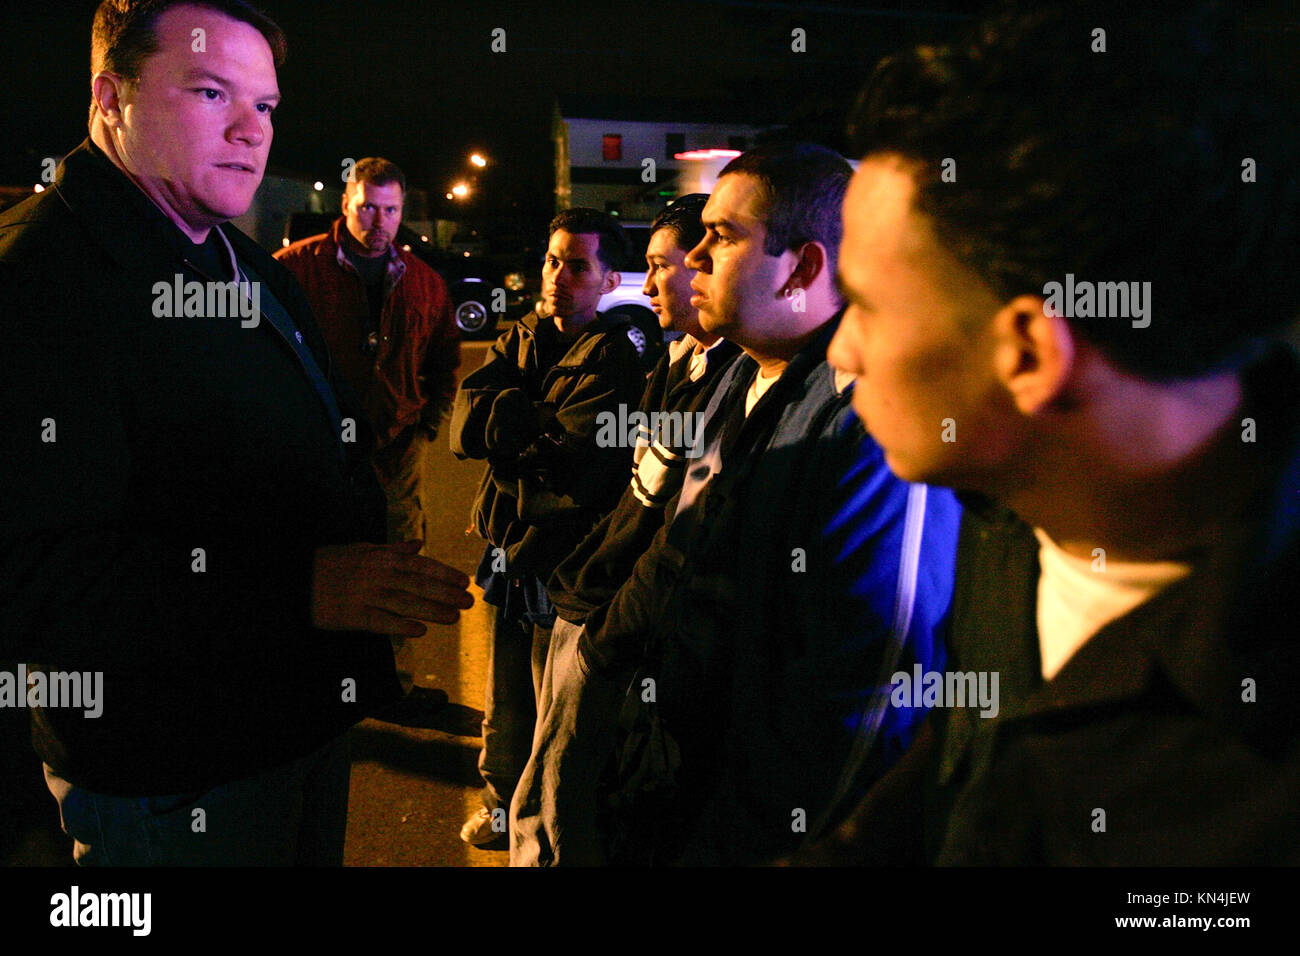 Suffolk County Police officers from the anti-gang unit check identity papers of possible gang members of Mara Salvatrucha 13 or MS-13, in Brentwood, New York. Many of the MS-13 members are in the U.S. illegally with false documents. Two of the four youths are  MS-13 members, first and second right.  Mara Salvatrucha 13 started in the 1980's in Los Angeles, California during the 12-year civil war in El Salvador when refugees fled north for safety and employment. Stock Photo